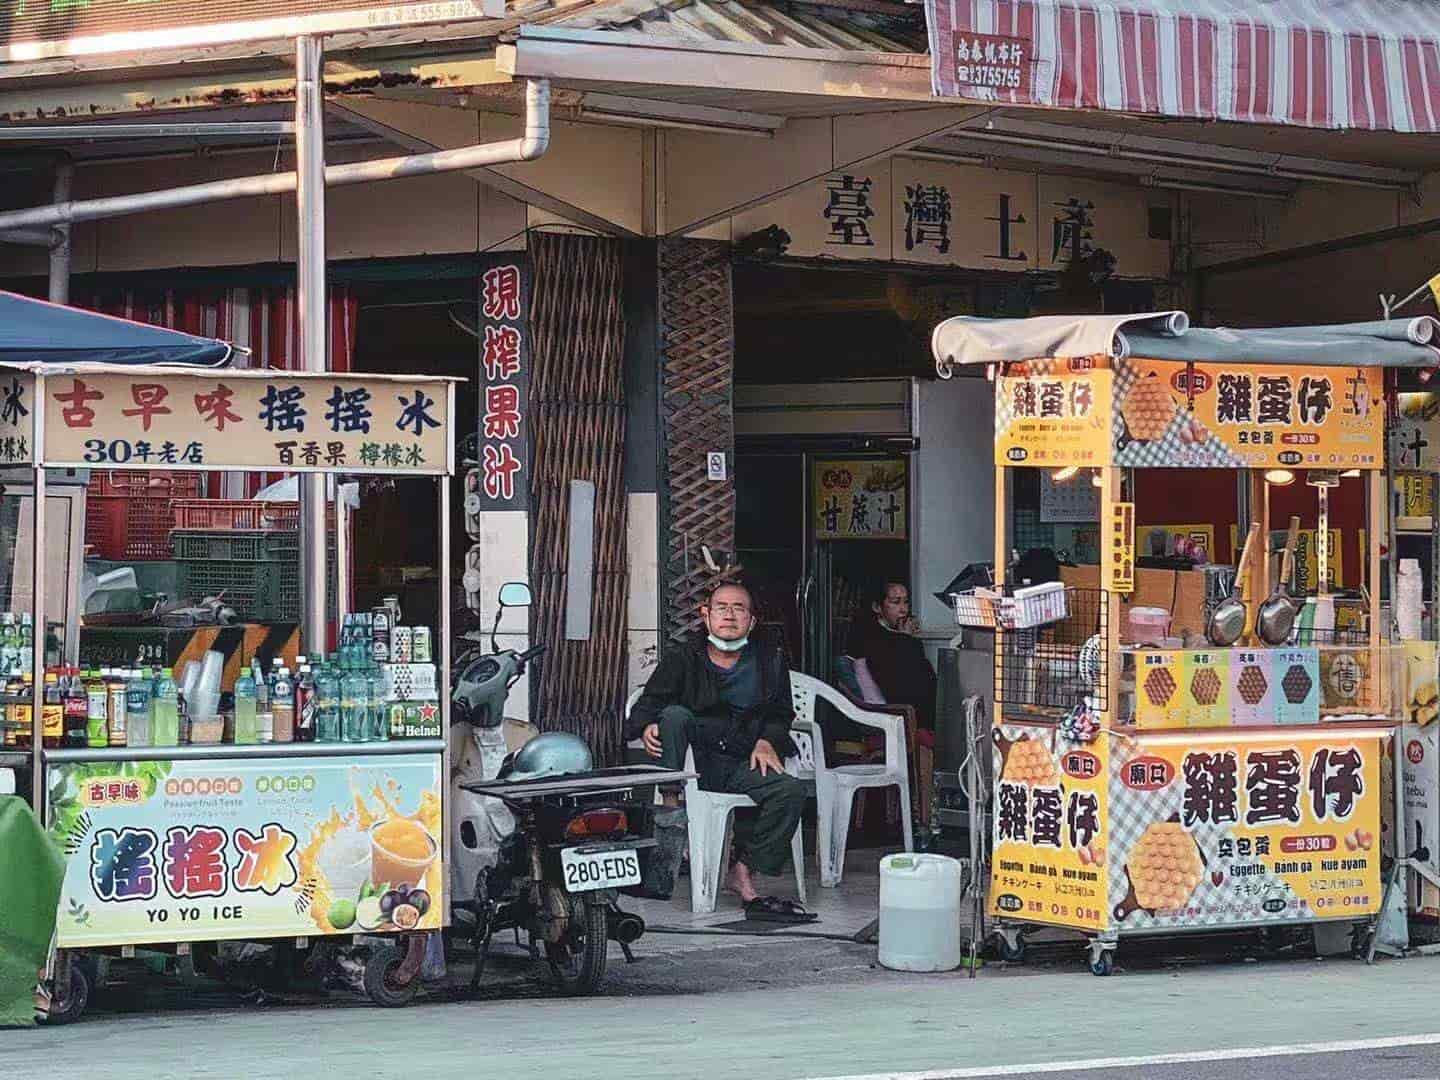 A far view of a middle aged man sitting in front of an old store